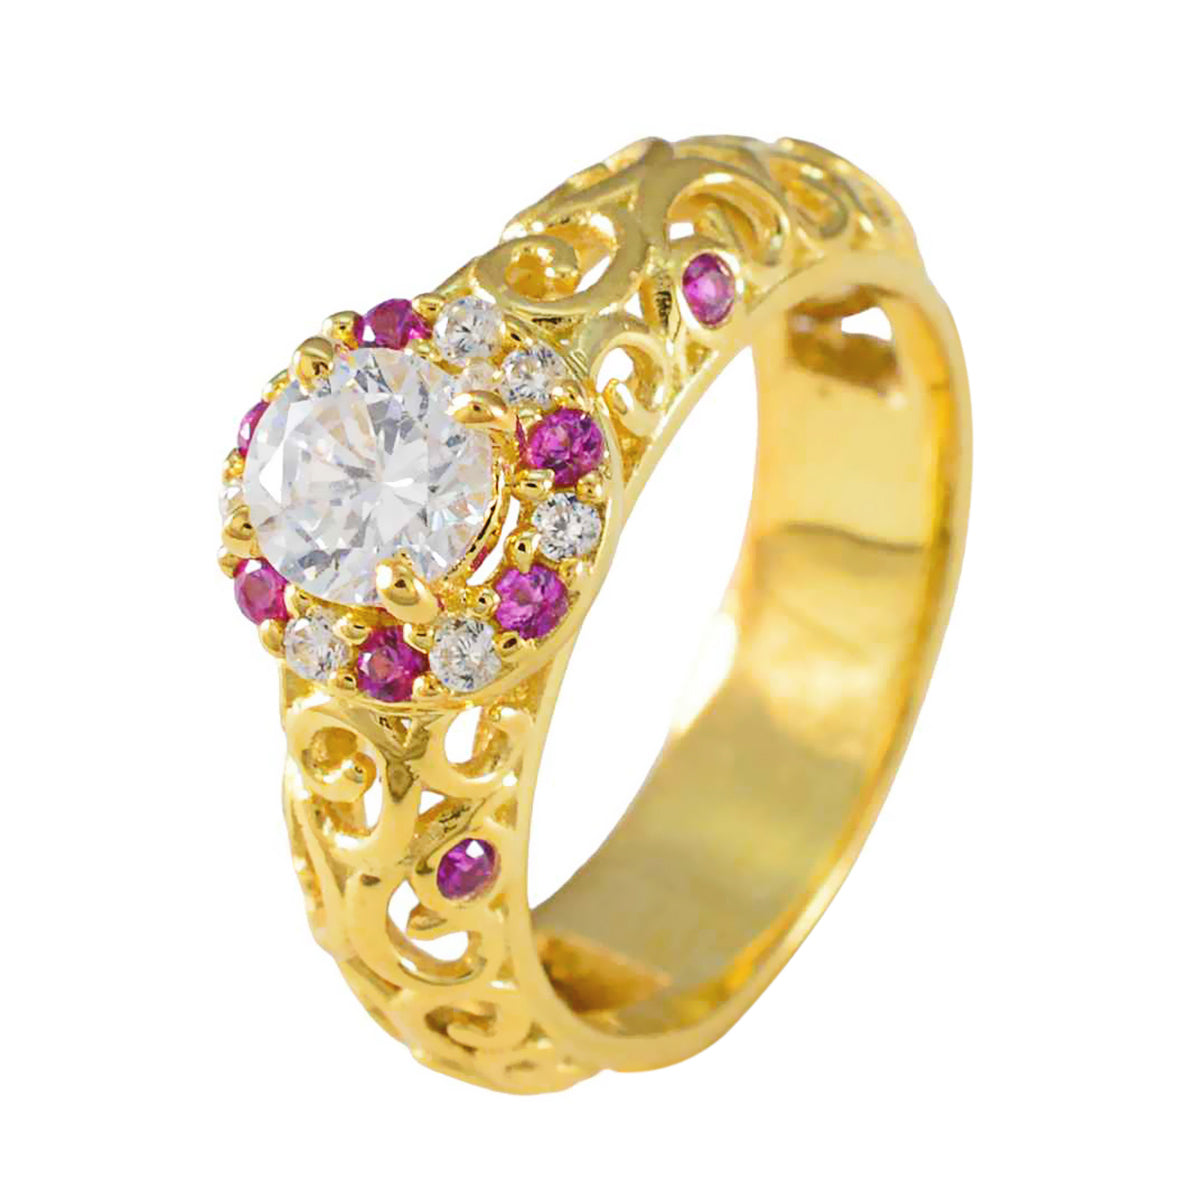 Riyo Complete Silver Ring With Yellow Gold Plating Ruby CZ Stone Round Shape Prong Setting Ring